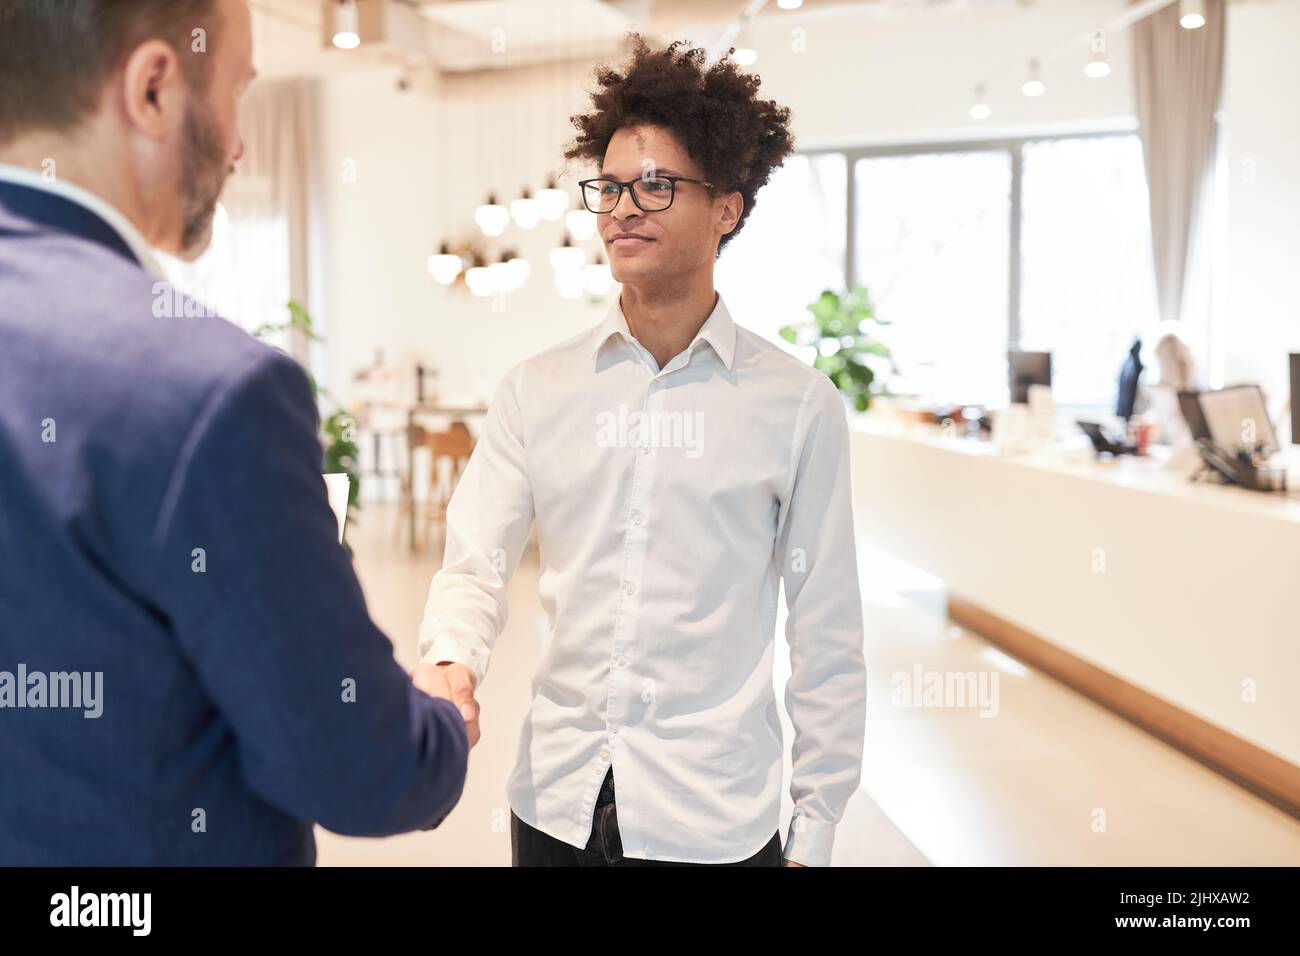 Young business man and manager shaking hands for greeting and partnership Stock Photo